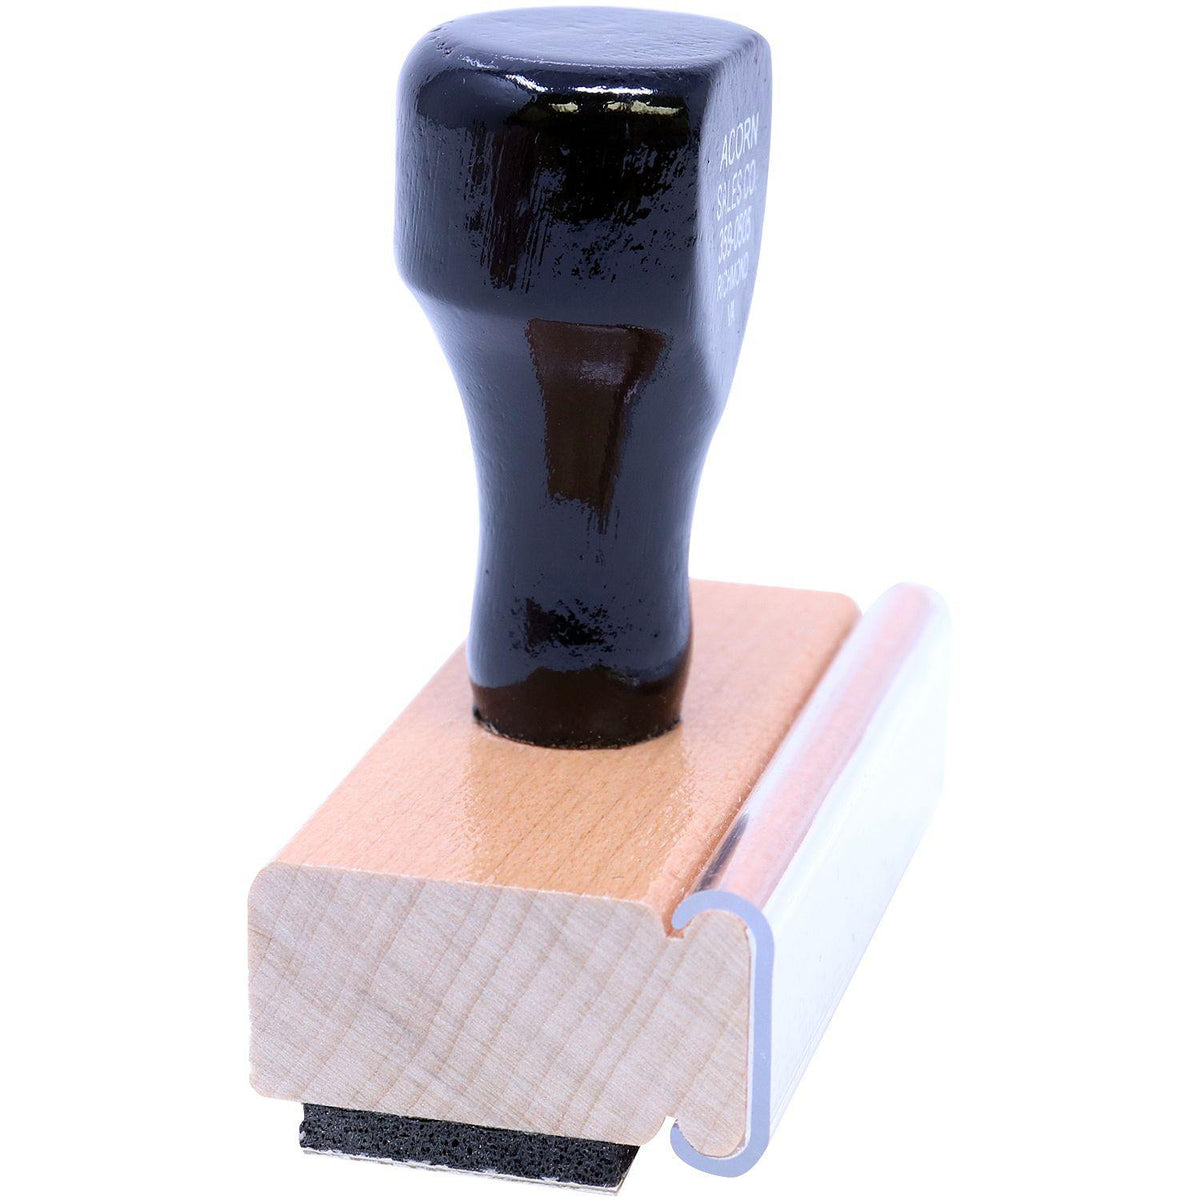 Narrow Font File Copy Rubber Stamp - Engineer Seal Stamps - Brand_Acorn, Impression Size_Small, Stamp Type_Regular Stamp, Type of Use_Business, Type of Use_Office, Type of Use_Professional